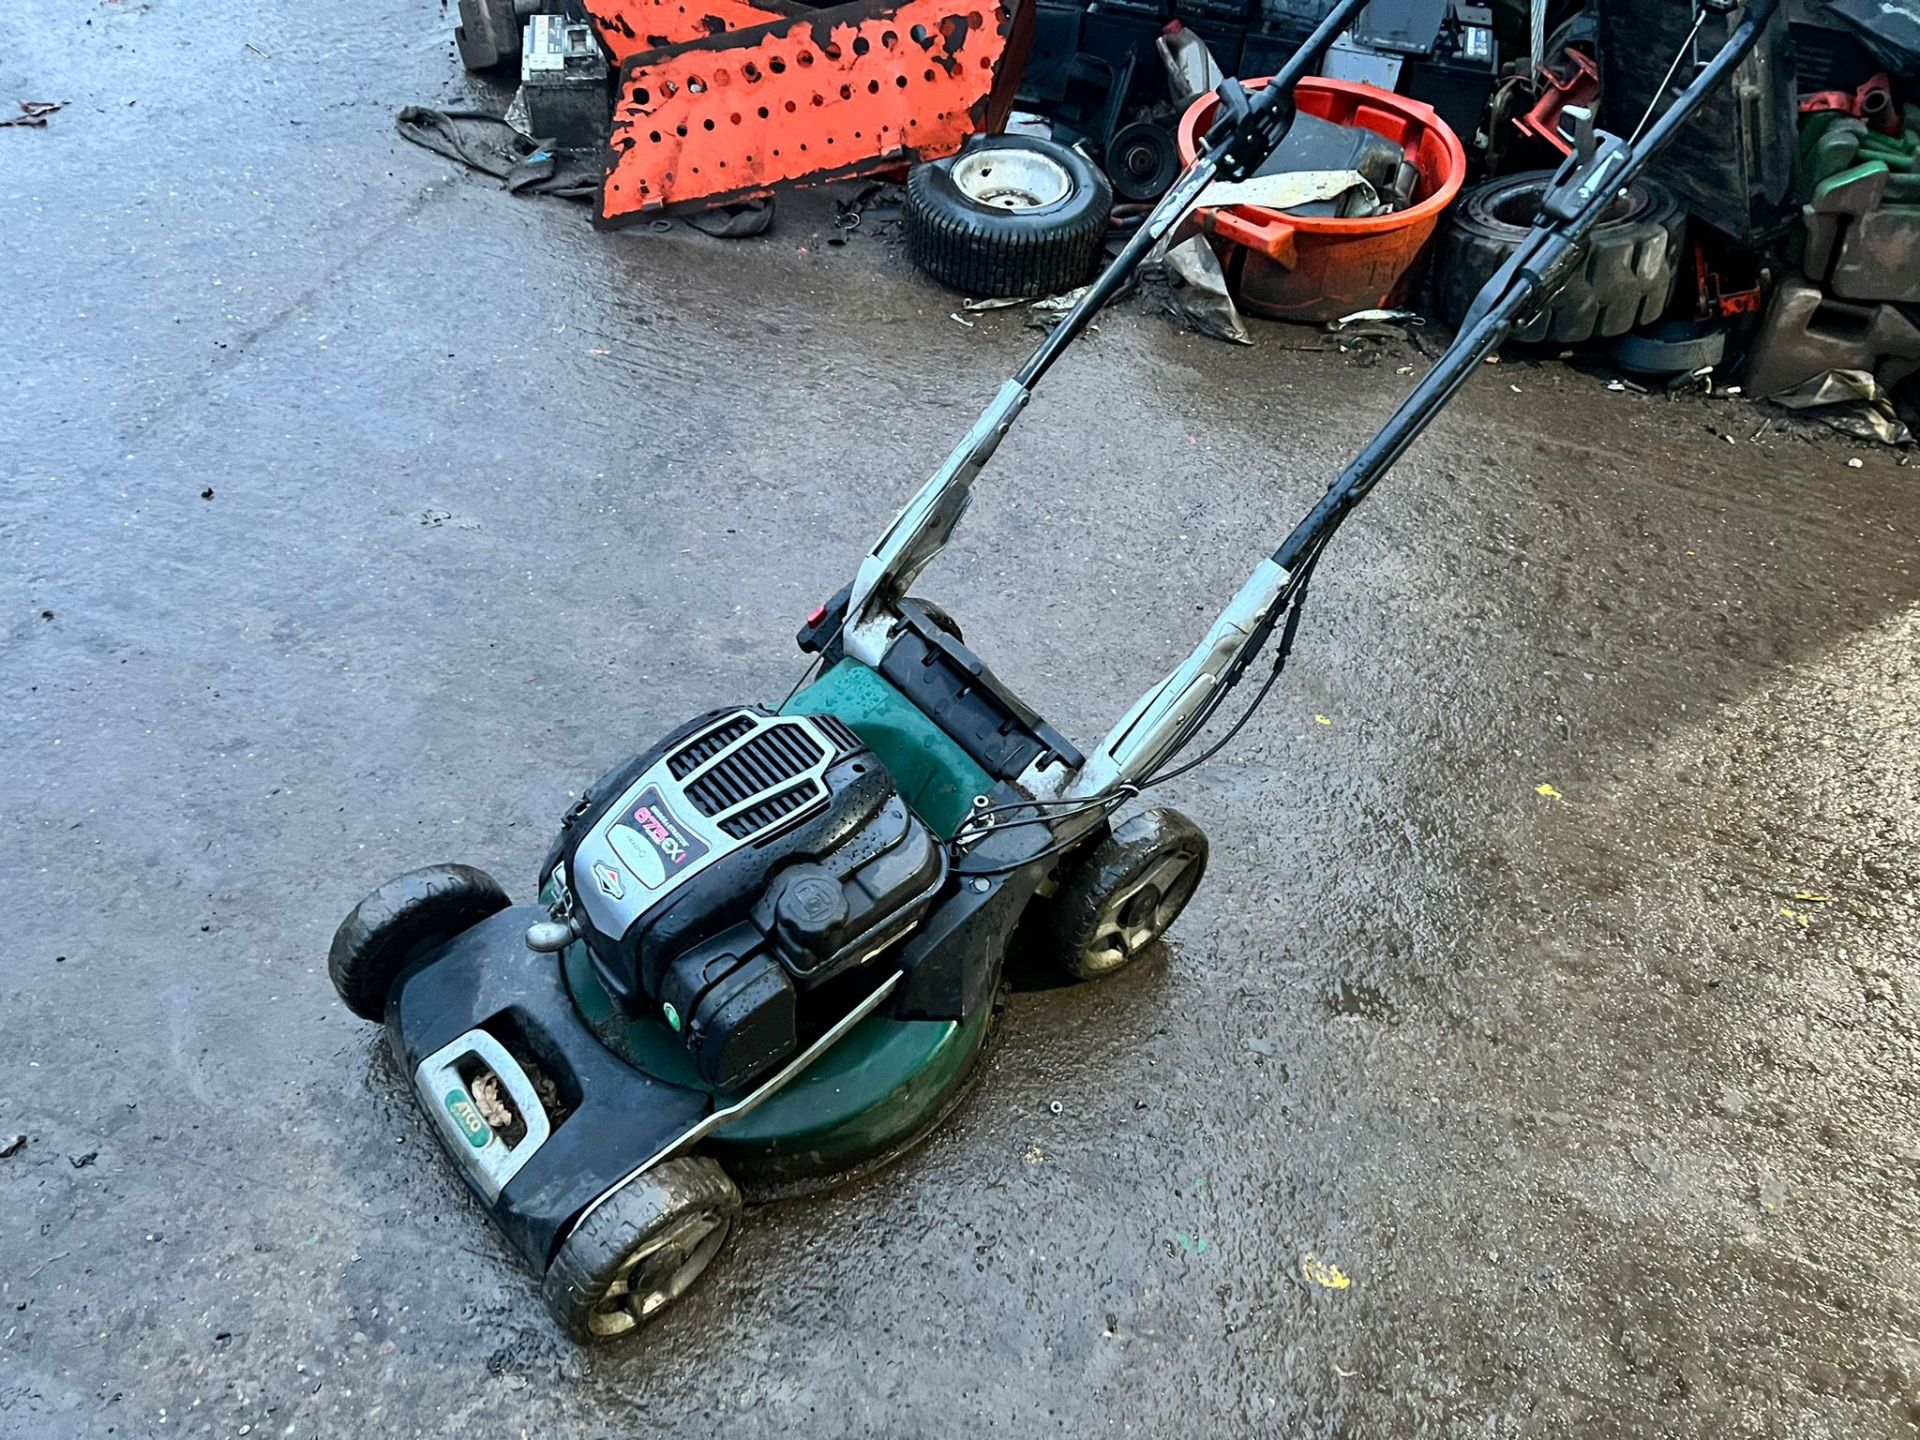 2018 ATCO QUATTRO 22SV SELF PROPELLED LAWN MOWER, GOOD COMPRESSION, SELF PROPELLED *NO VAT* - Image 2 of 7